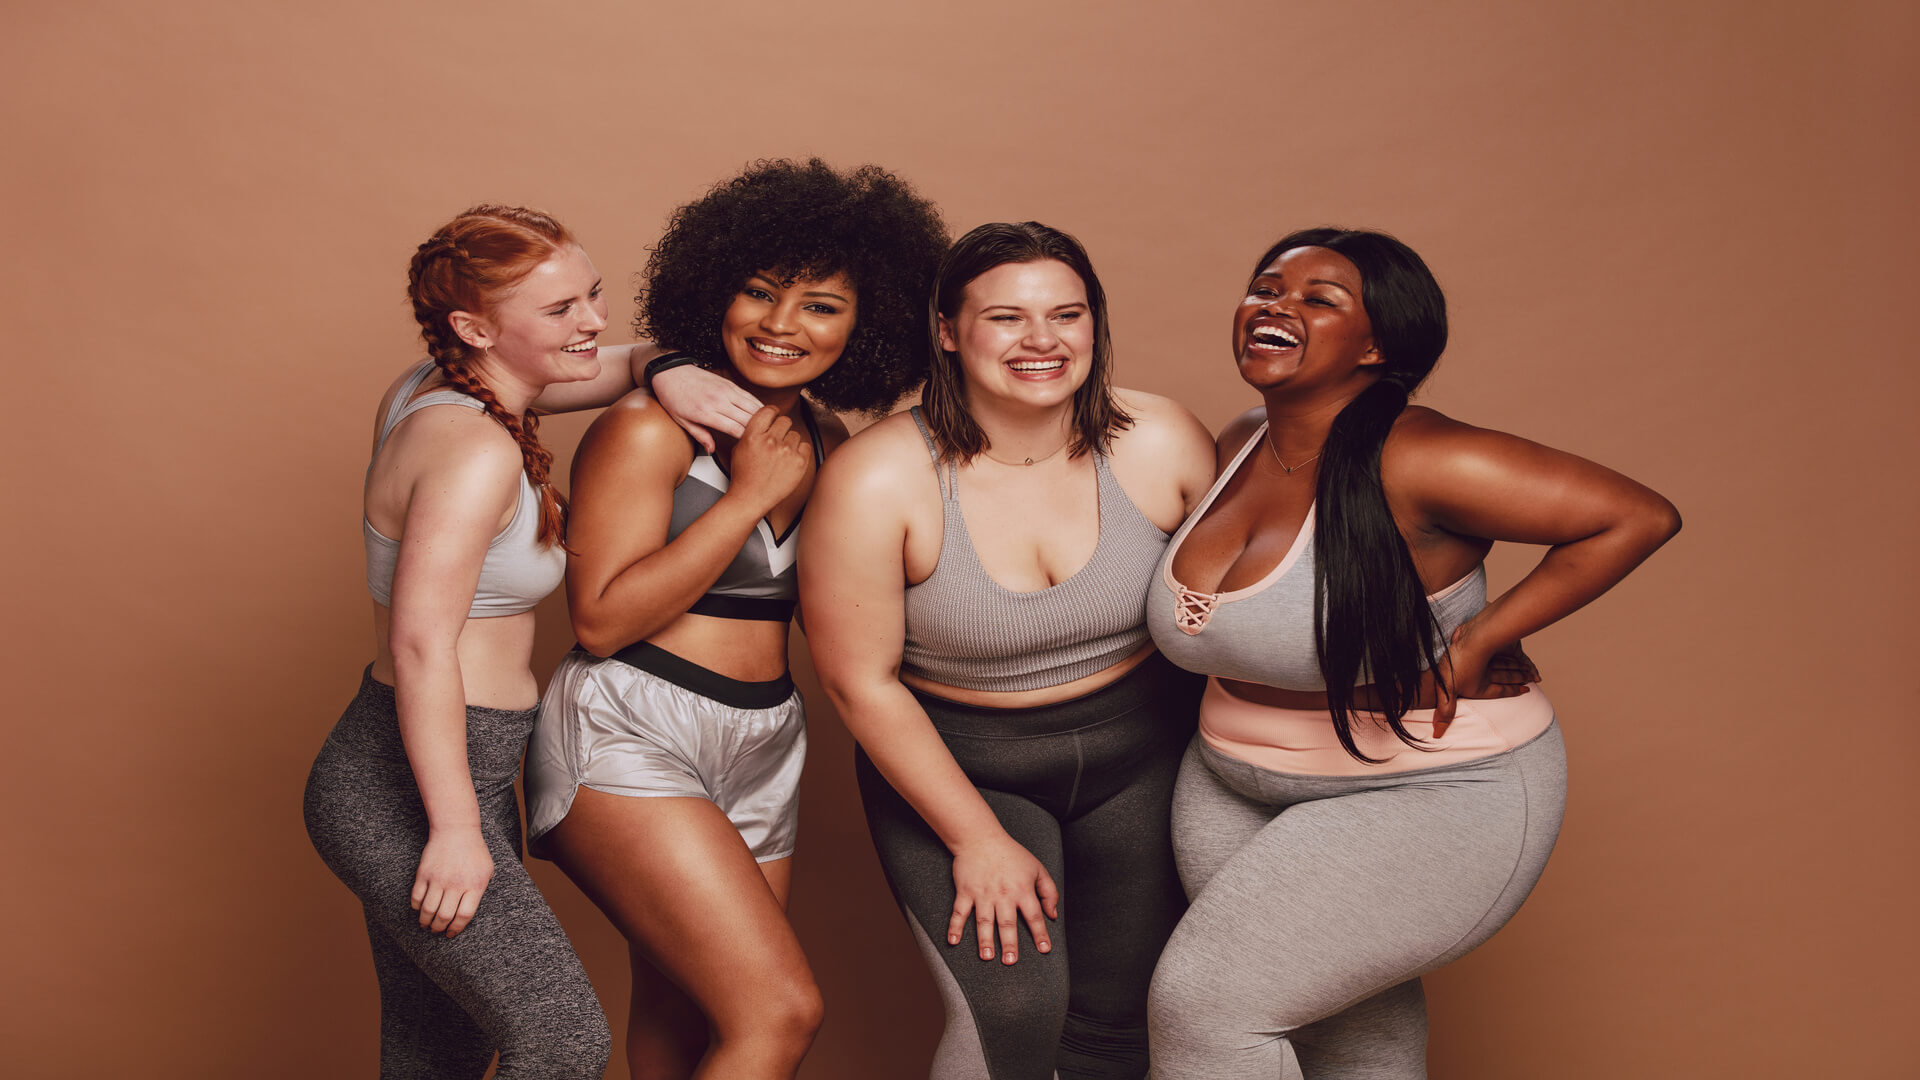 Millennials Have the Least Body Confidence in 2020